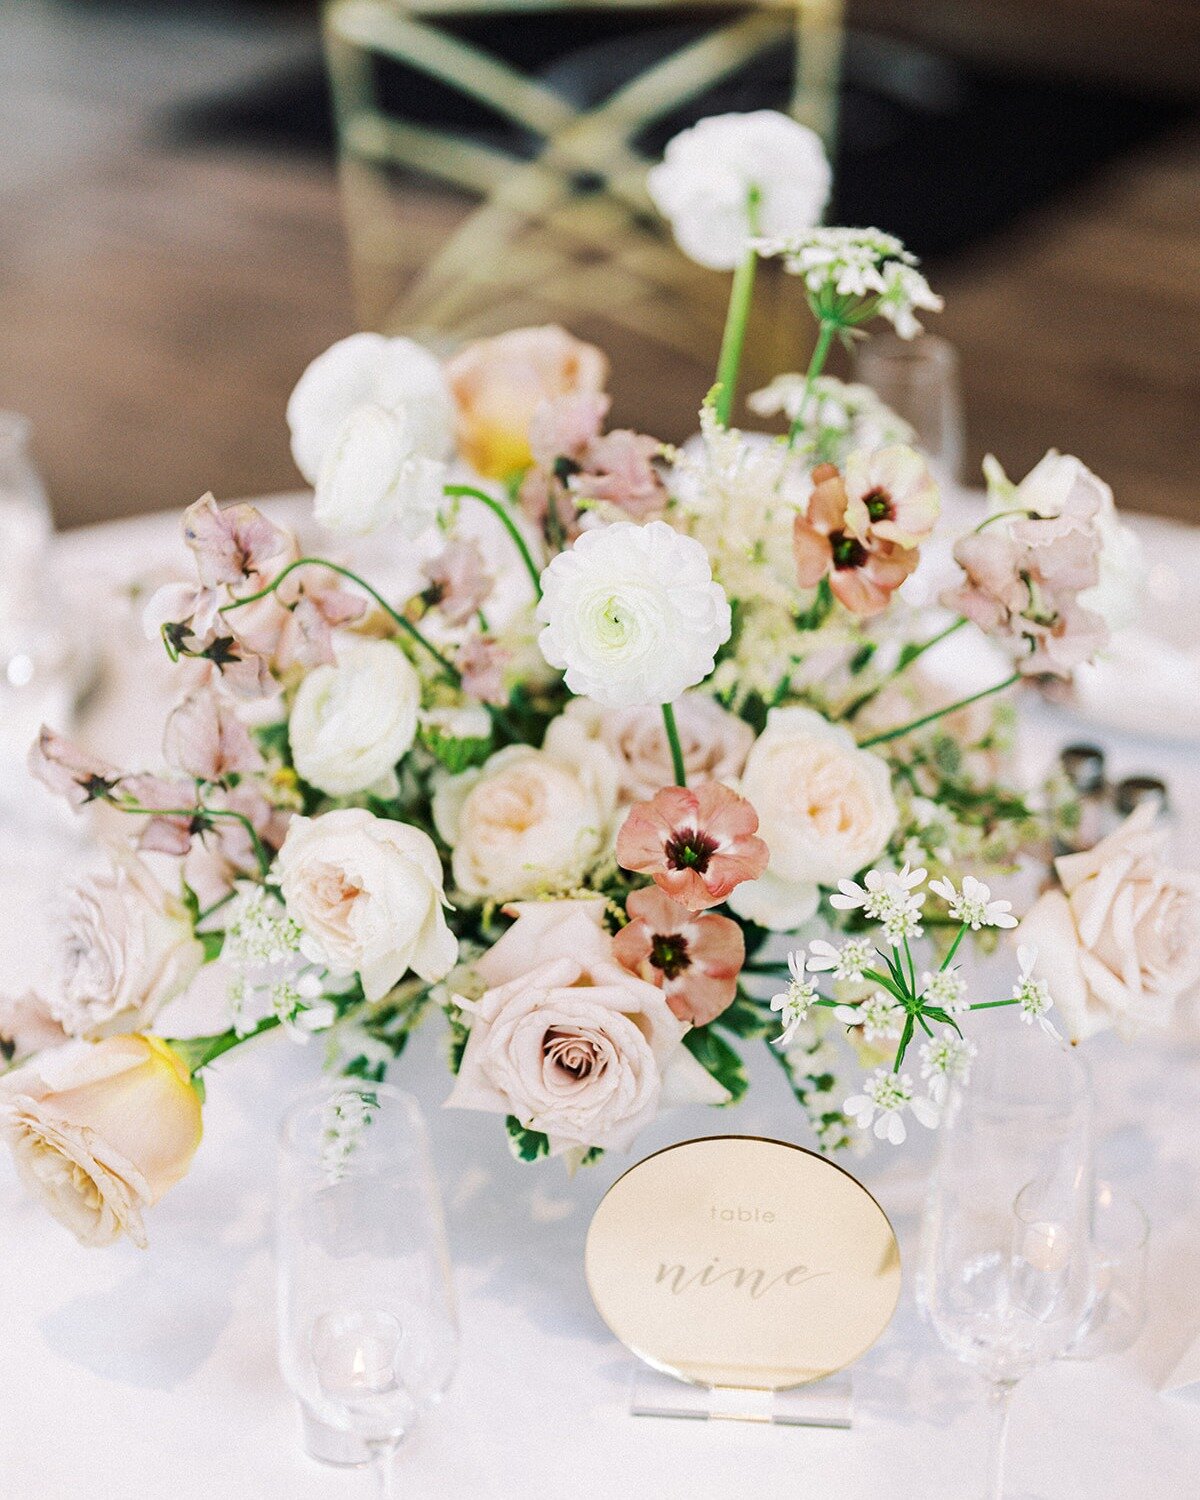 We can't resist the soft pink details from Katie and Tim's wedding &ndash; and it looks like they were thrilled too! 🥰

Photography by @laurenleephotography
Planned by @aisleandco 
Catered by @togethercoevents 
Cake and Desserts by @sadiebabysweets 